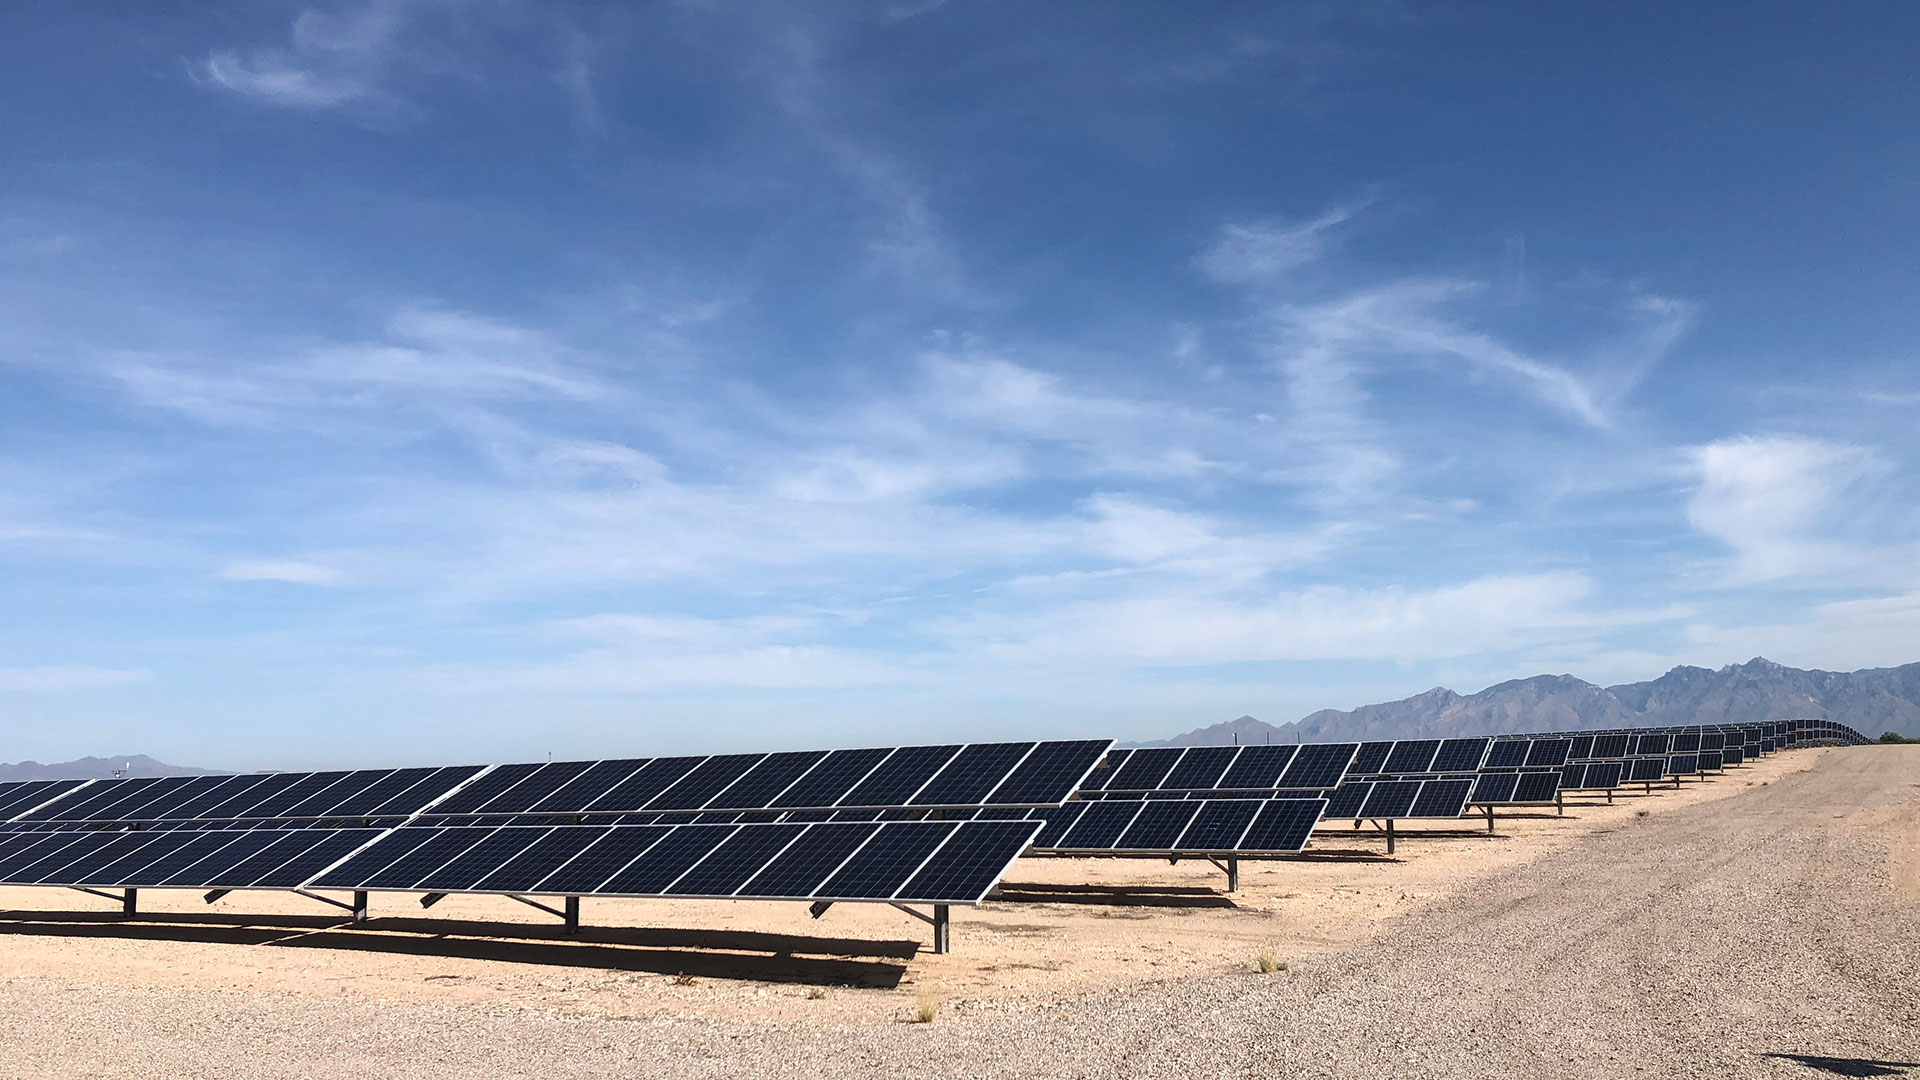 A solar array used by Tucson Electric Power to add renewable energy to the grid, August 2019